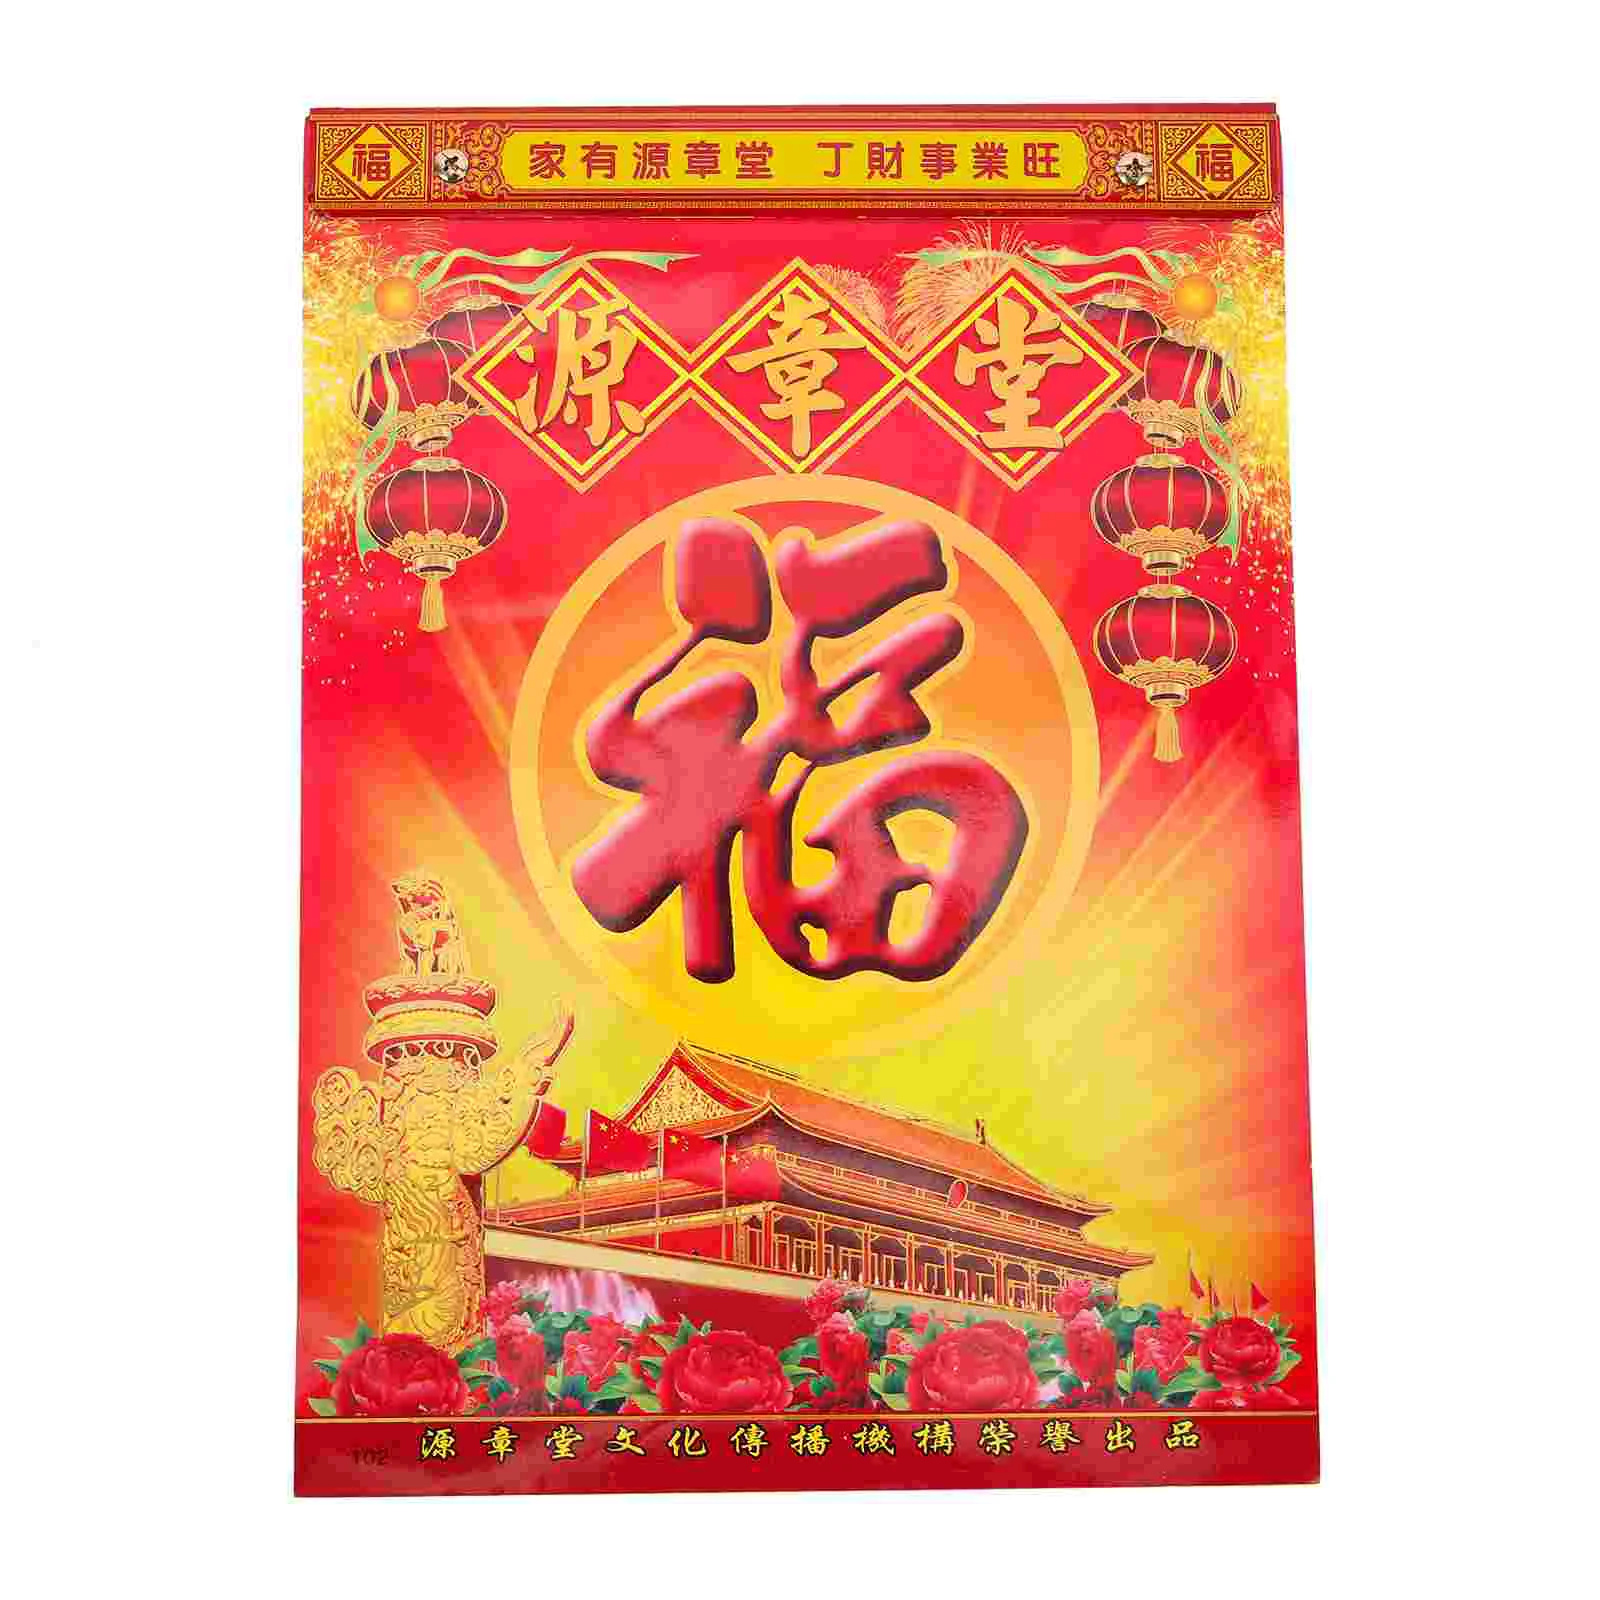 

Calendar Wall Chinese Year New Hanging Lunar Daily Monthly Yearly 2023 Office Planner Traditional The Perpetual Notepad Schedule